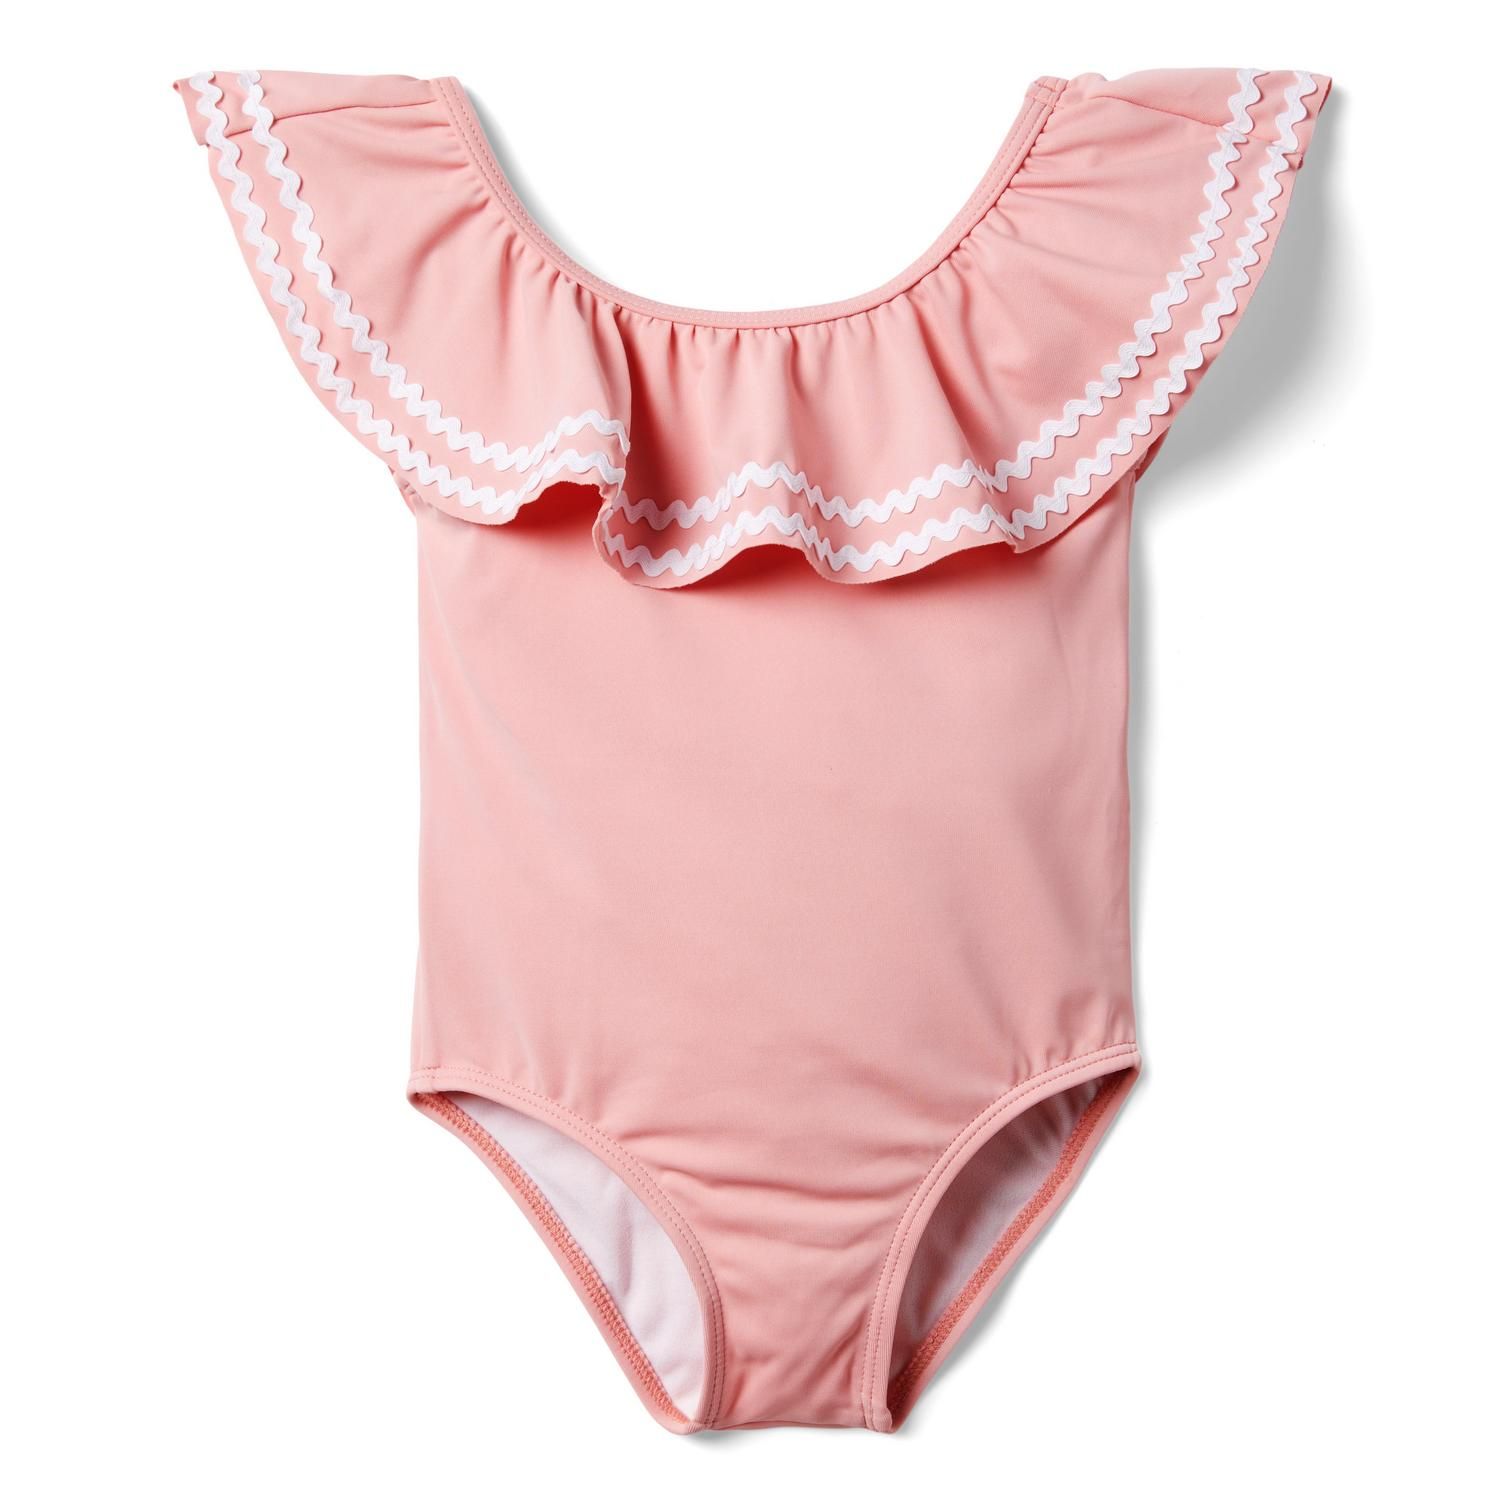 Recycled Ric Rac Ruffle Swimsuit | Janie and Jack